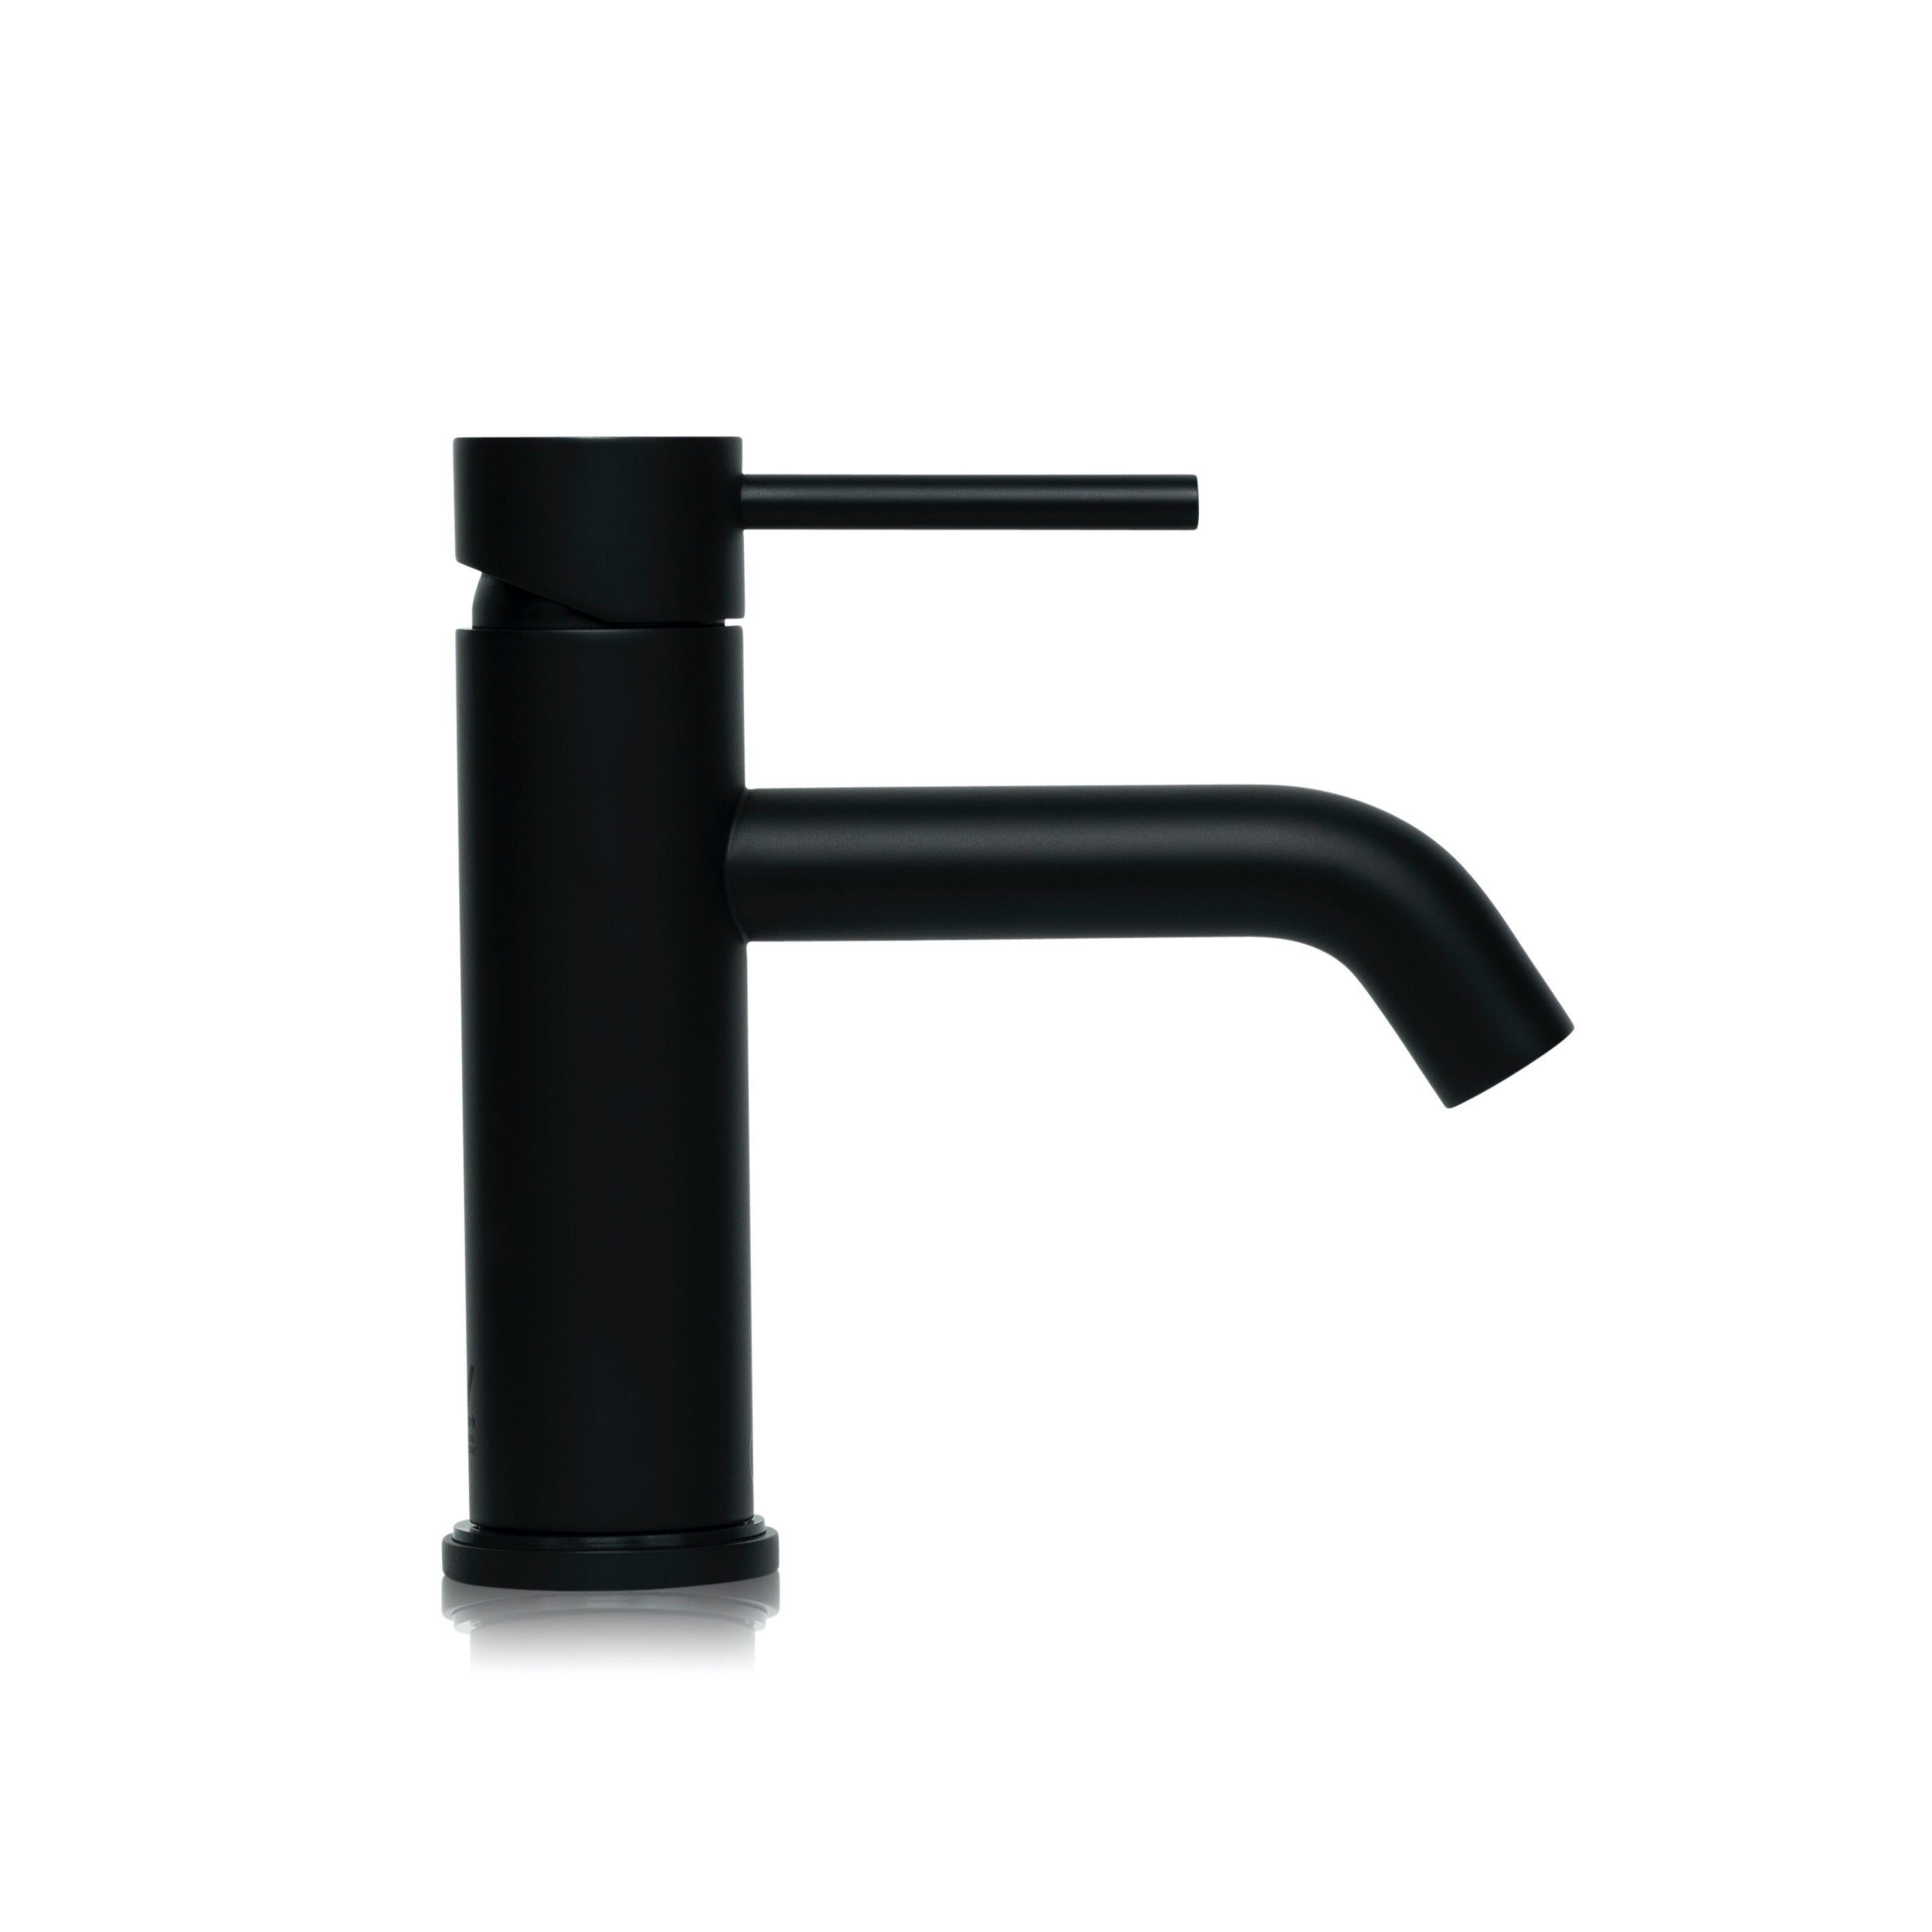 Bondi Pin Lever Basin Mixer with Curved Spout in Matte Black